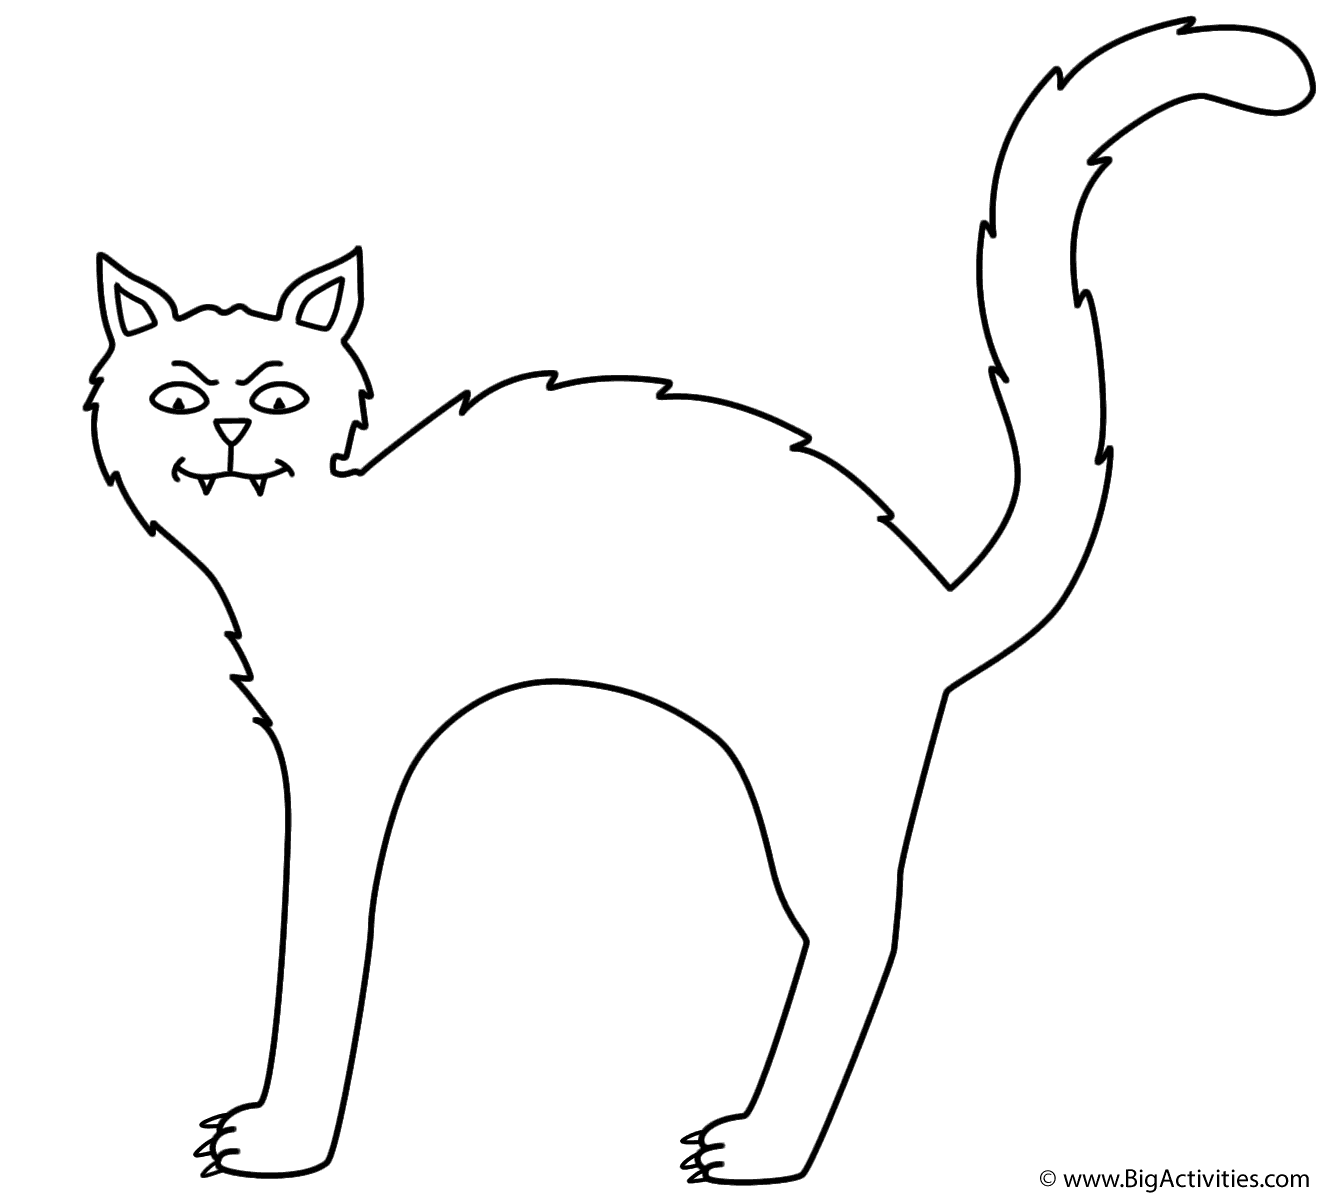 Black cat - Coloring Page (Halloween)